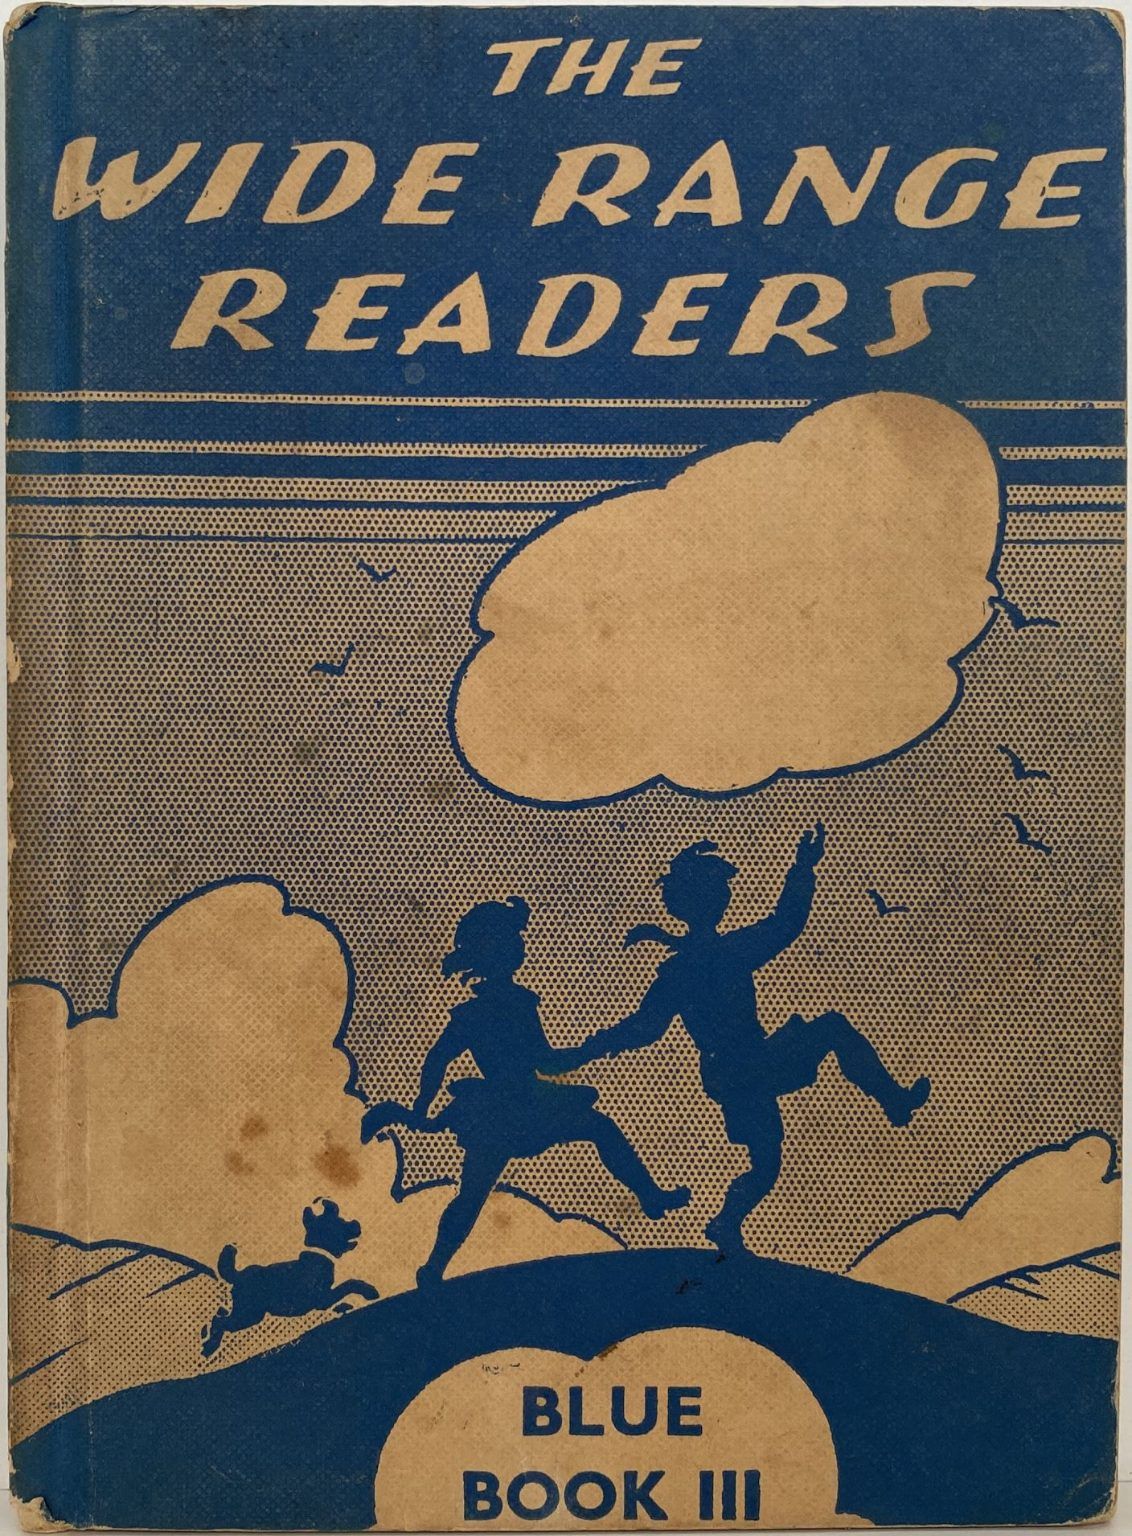 THE WIDE RANGE READERS, Blue Book 3